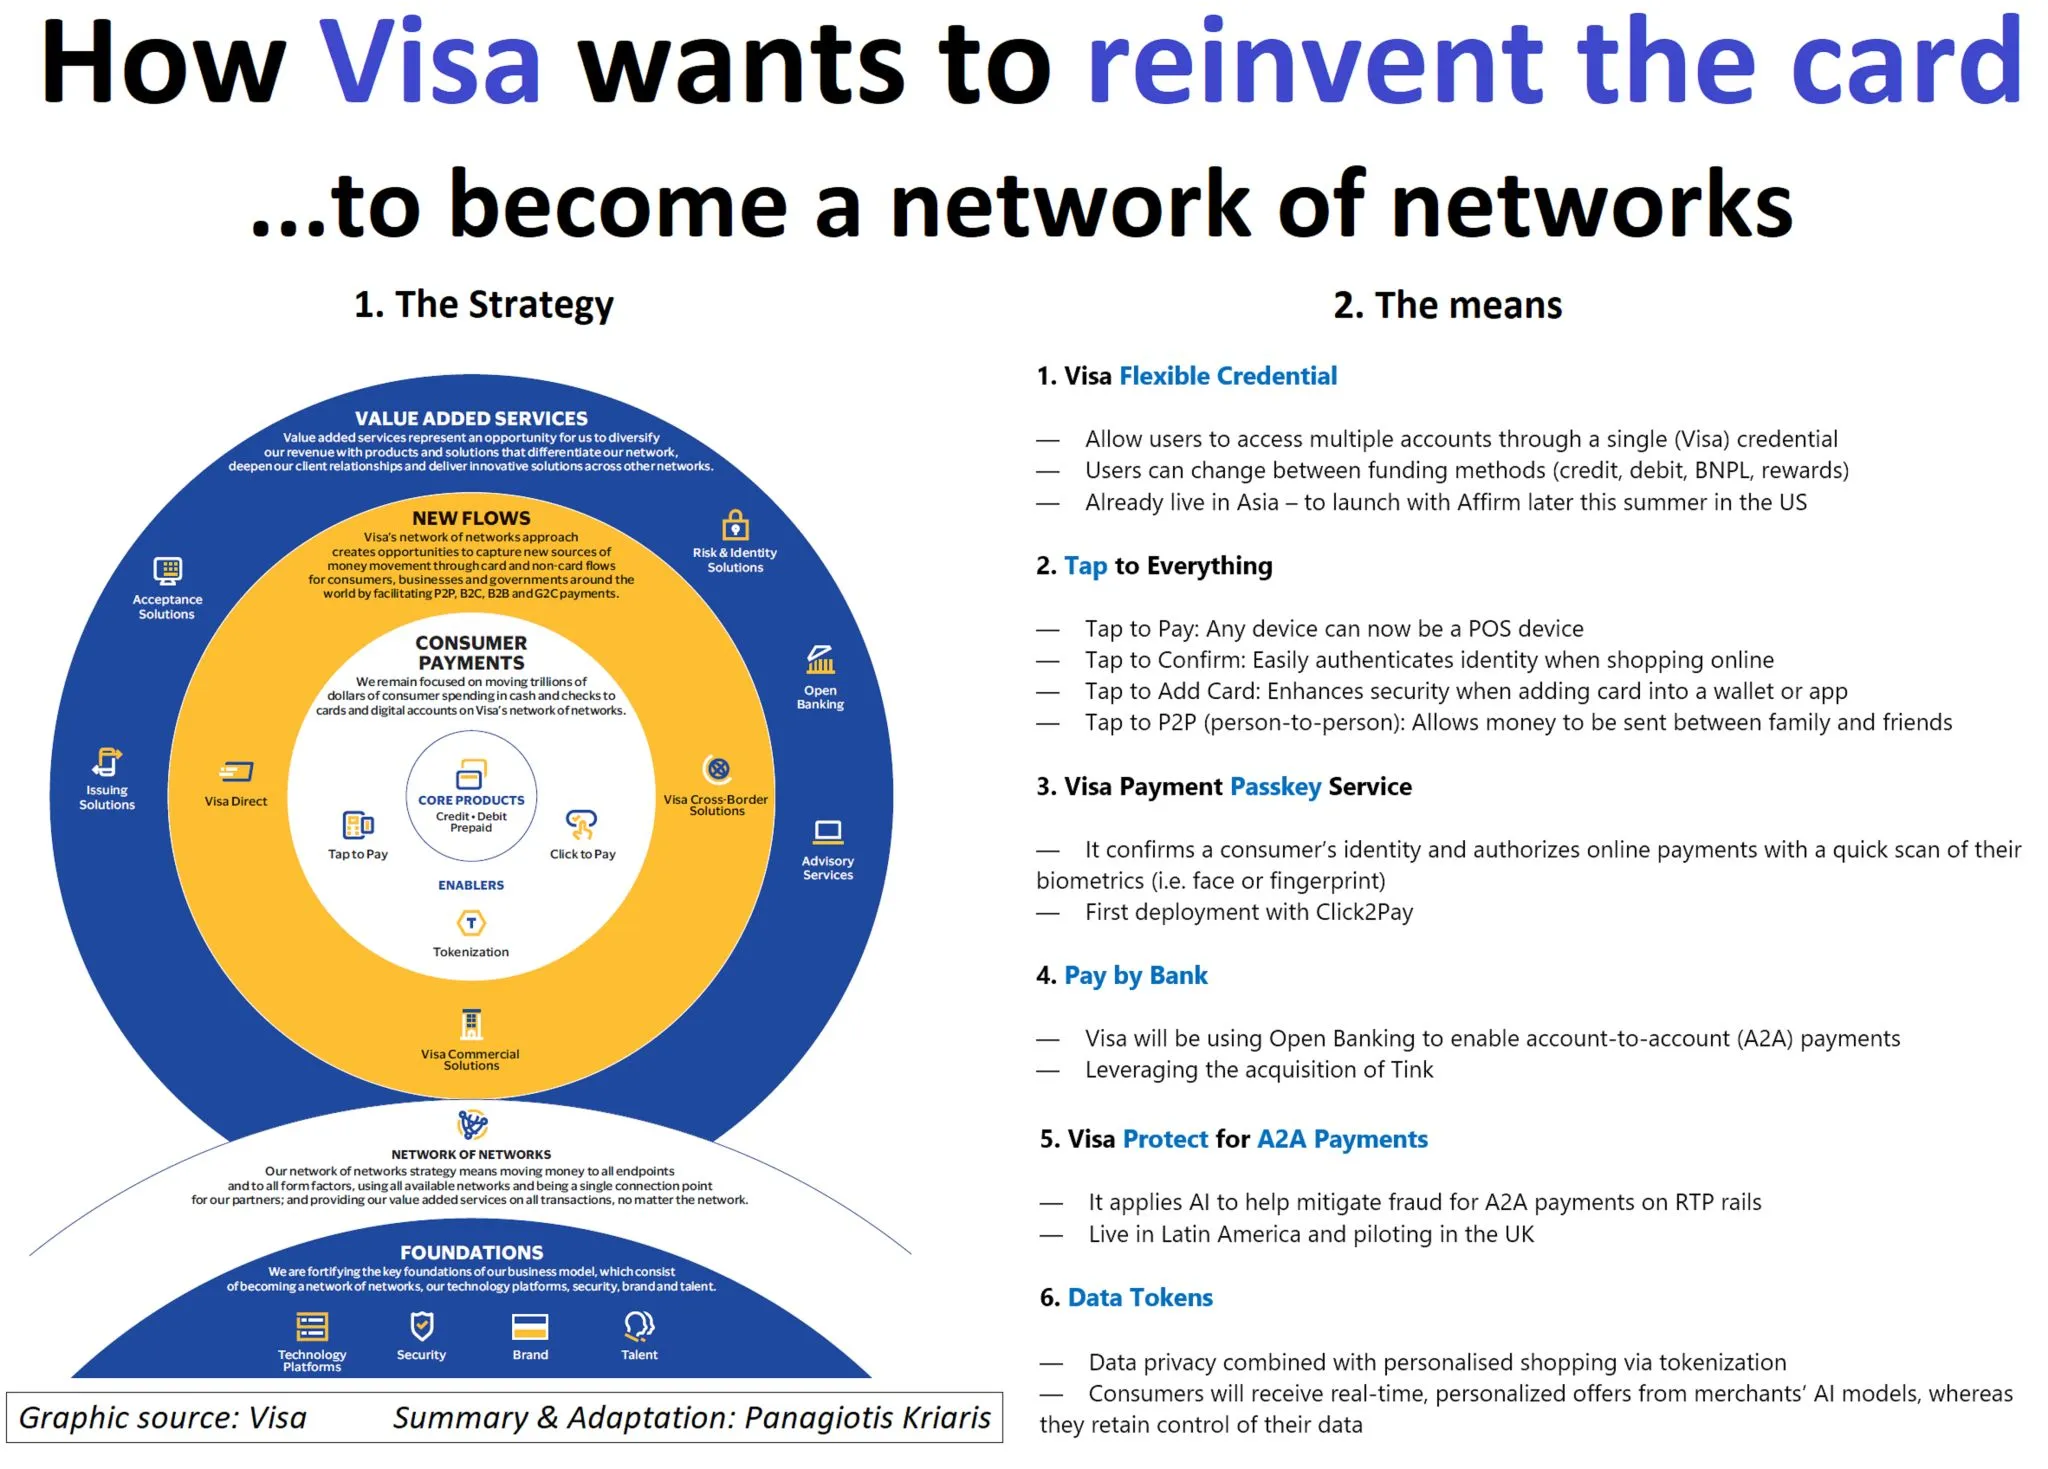 Visa wants to become a network of networks. Re-inventing the card is a means to do it. Can they pull it off? Let’s take a look.